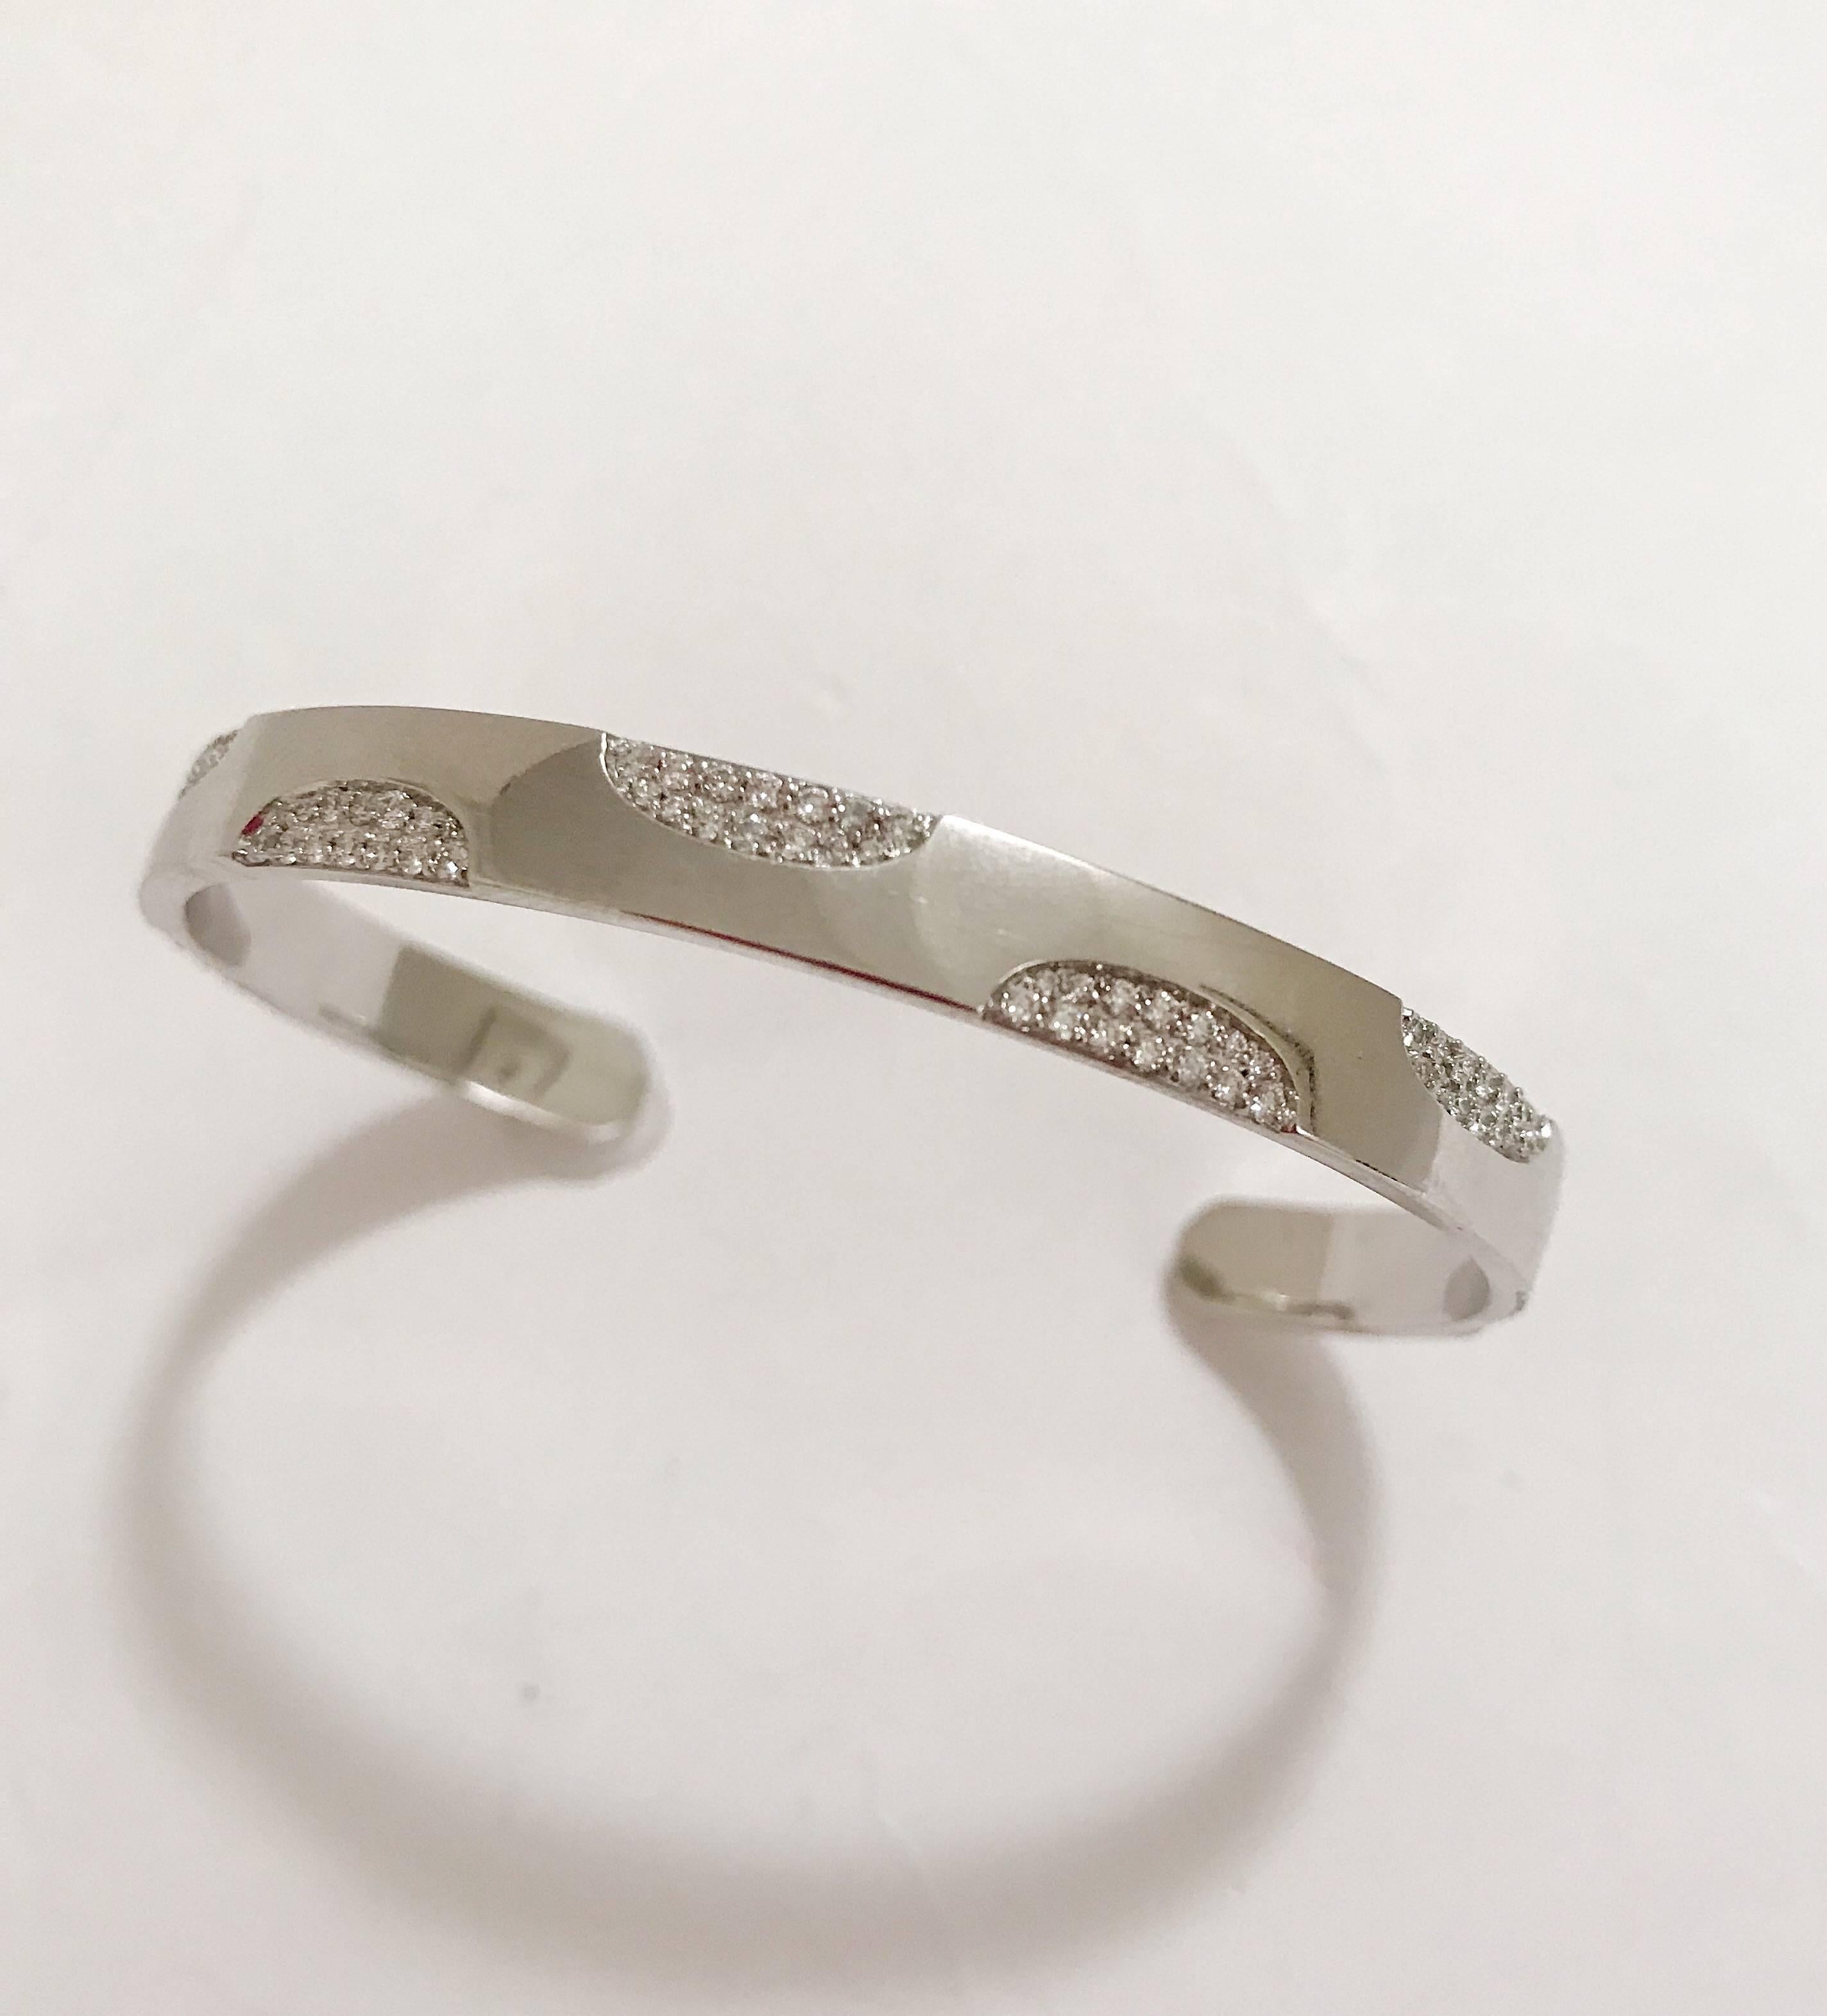 18kt White Gold Polka Dot Diamond Cuff Bracelet, is a great addition for stacking bracelets or is beautiful alone. 

This Bracelet can be made in any color gold and fits to all wrist sizes. 

Please contact us with any inquiries you may have.